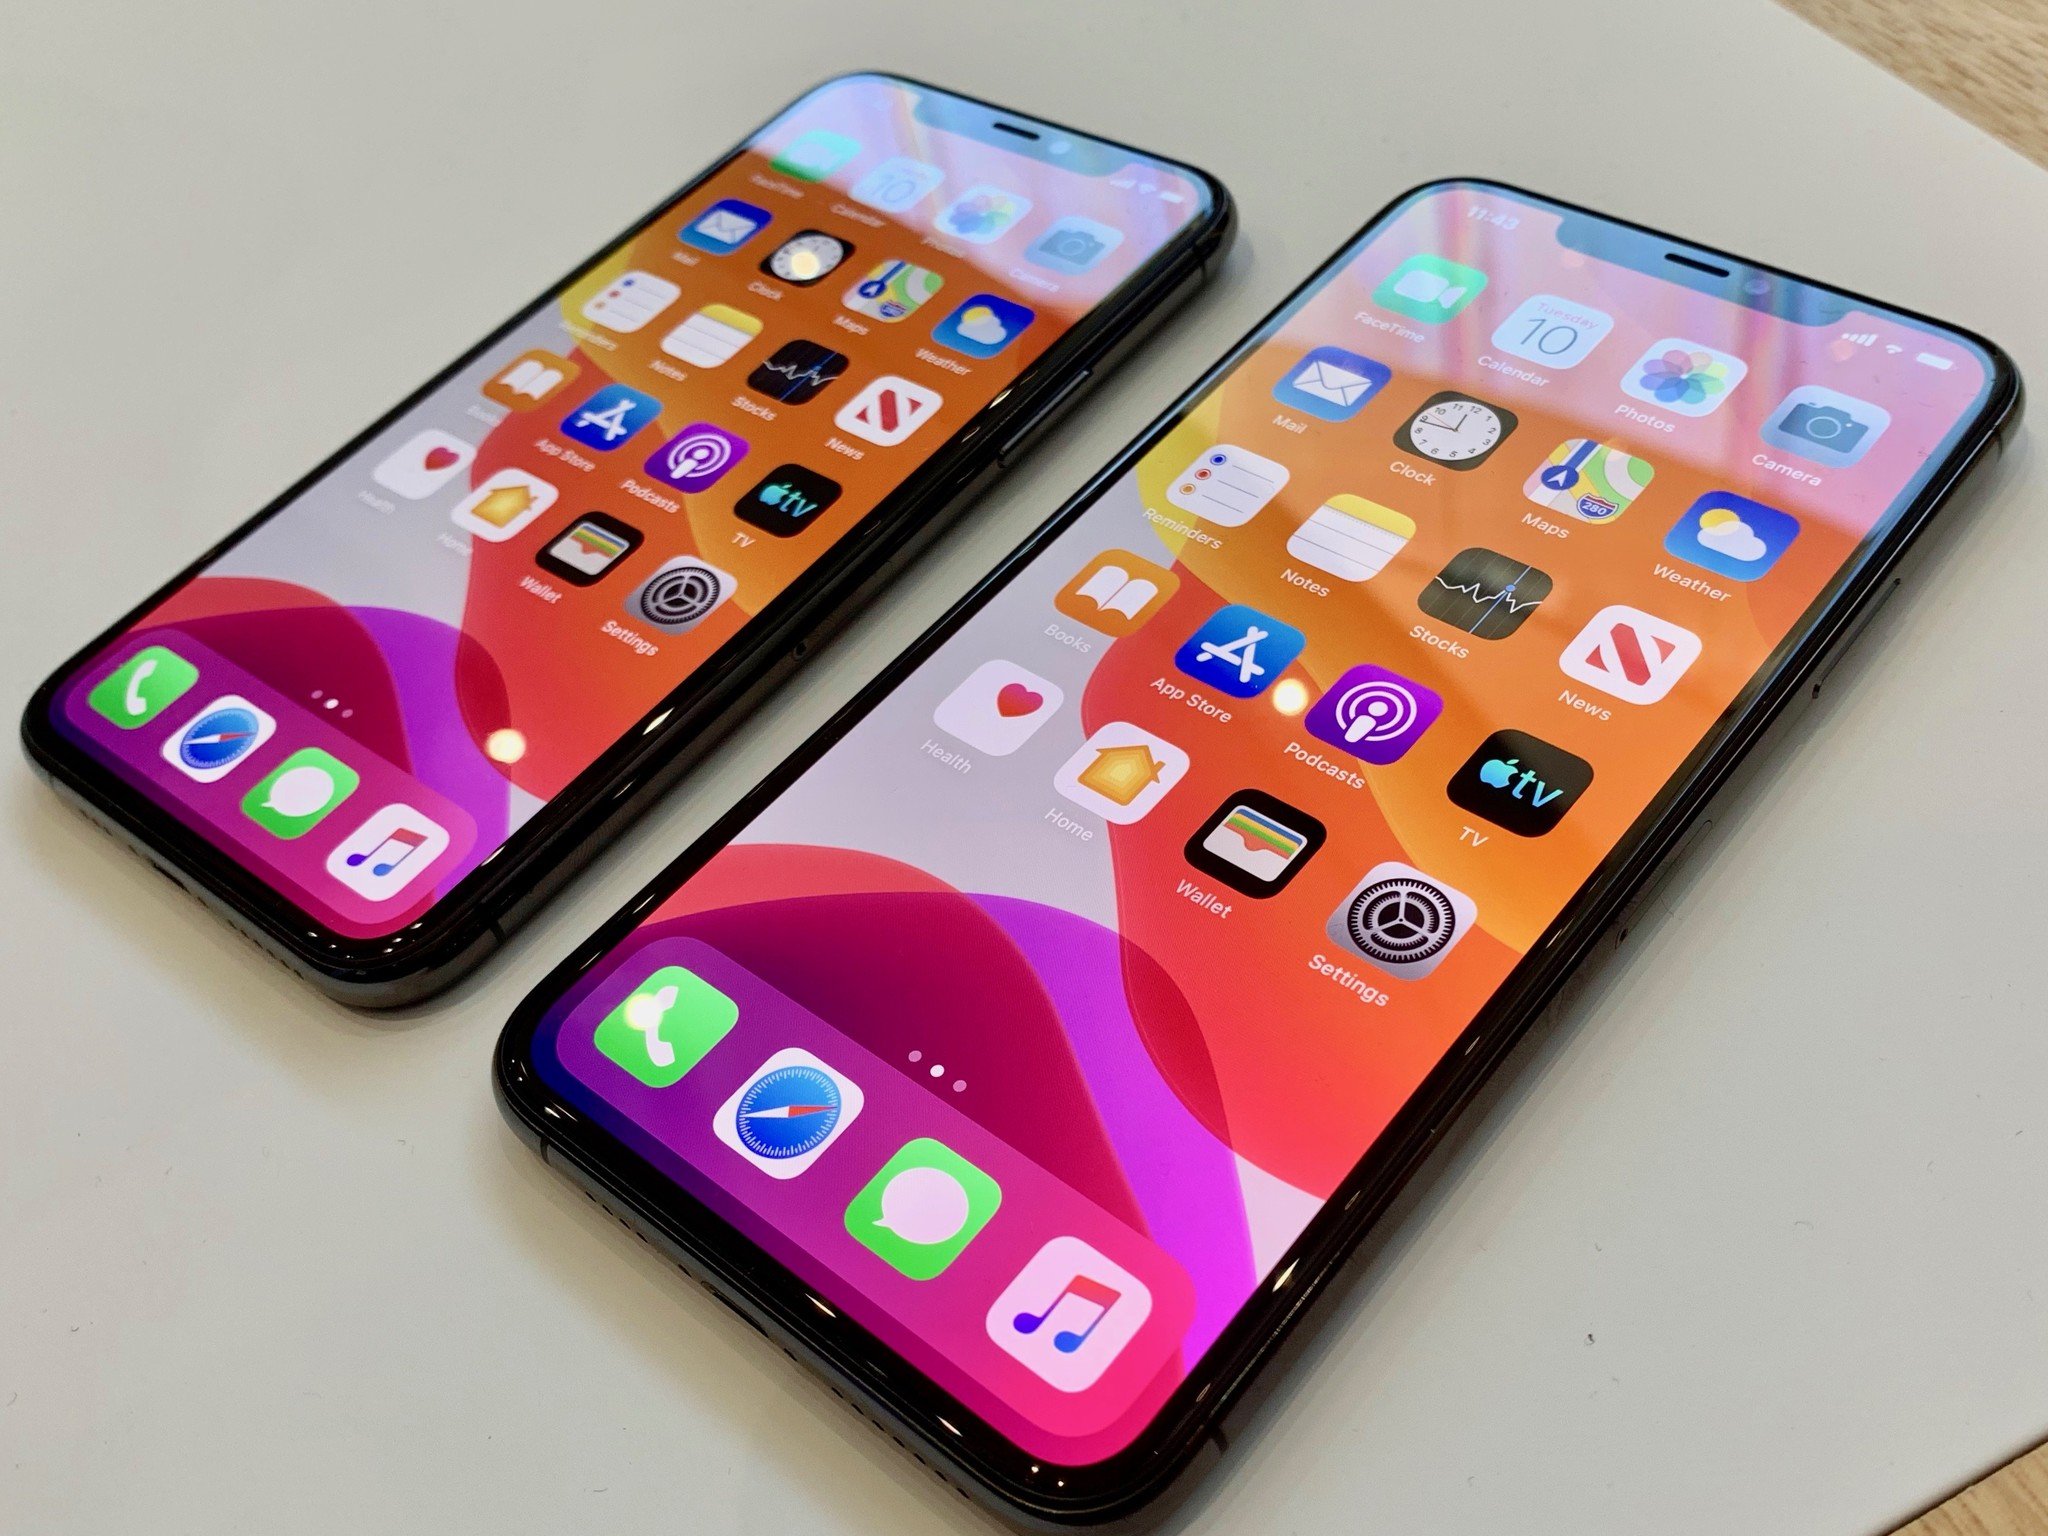 iPhone 11 Pro and Pro Max side-by-side